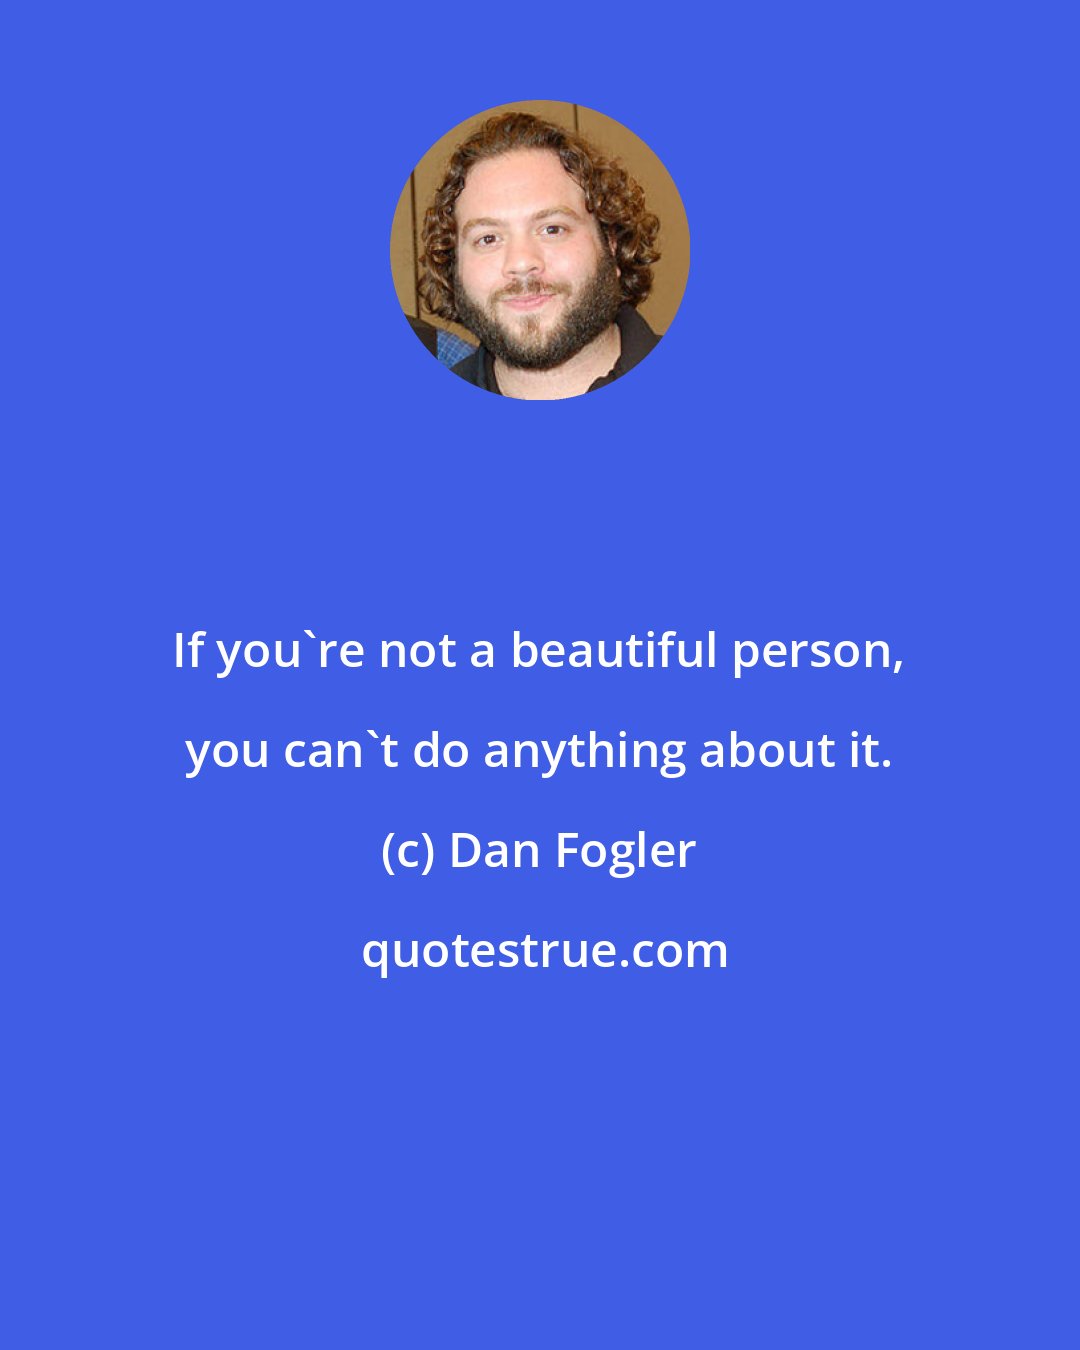 Dan Fogler: If you're not a beautiful person, you can't do anything about it.